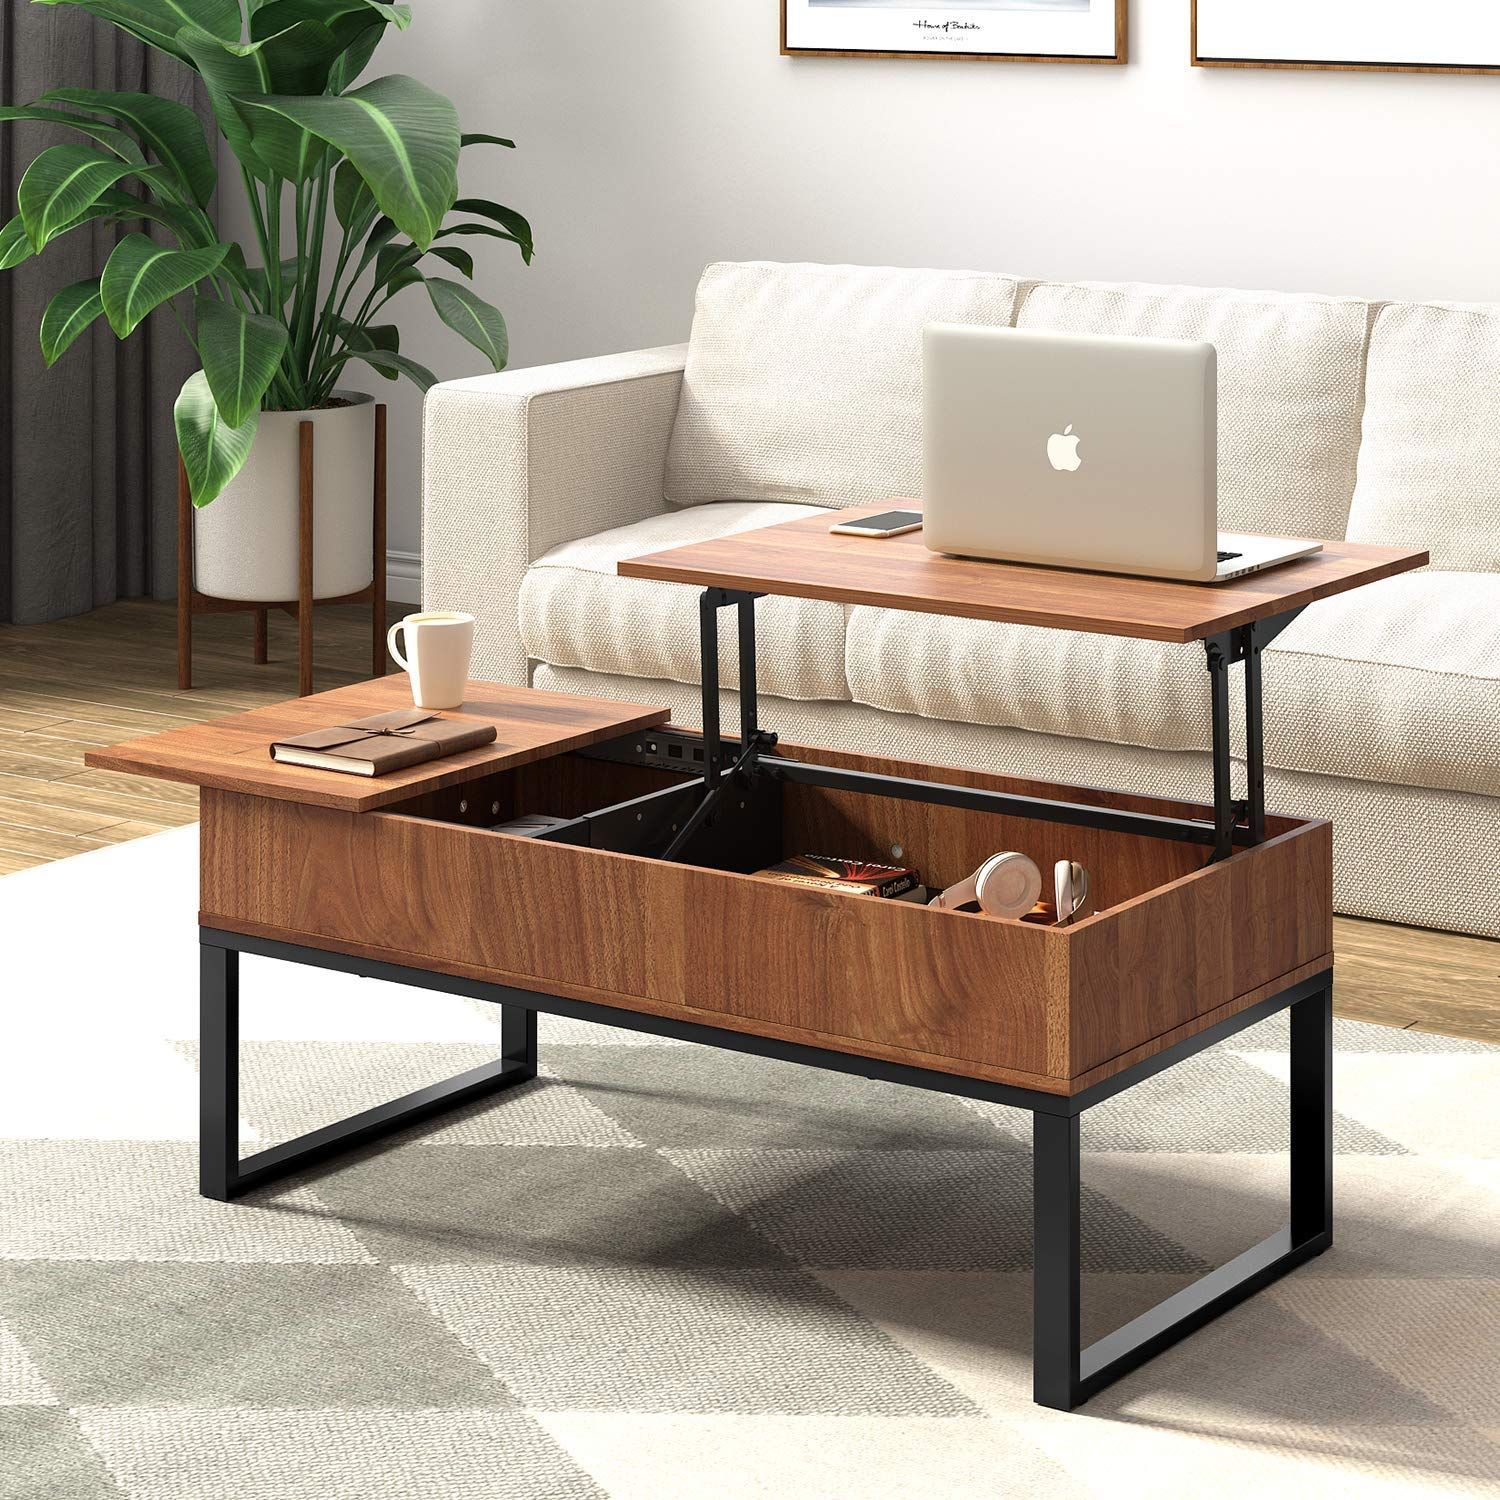 Wlive Wood Coffee Table With Adjustable Lift Top Table, Metal Frame With Regard To High Gloss Lift Top Coffee Tables (View 15 of 15)